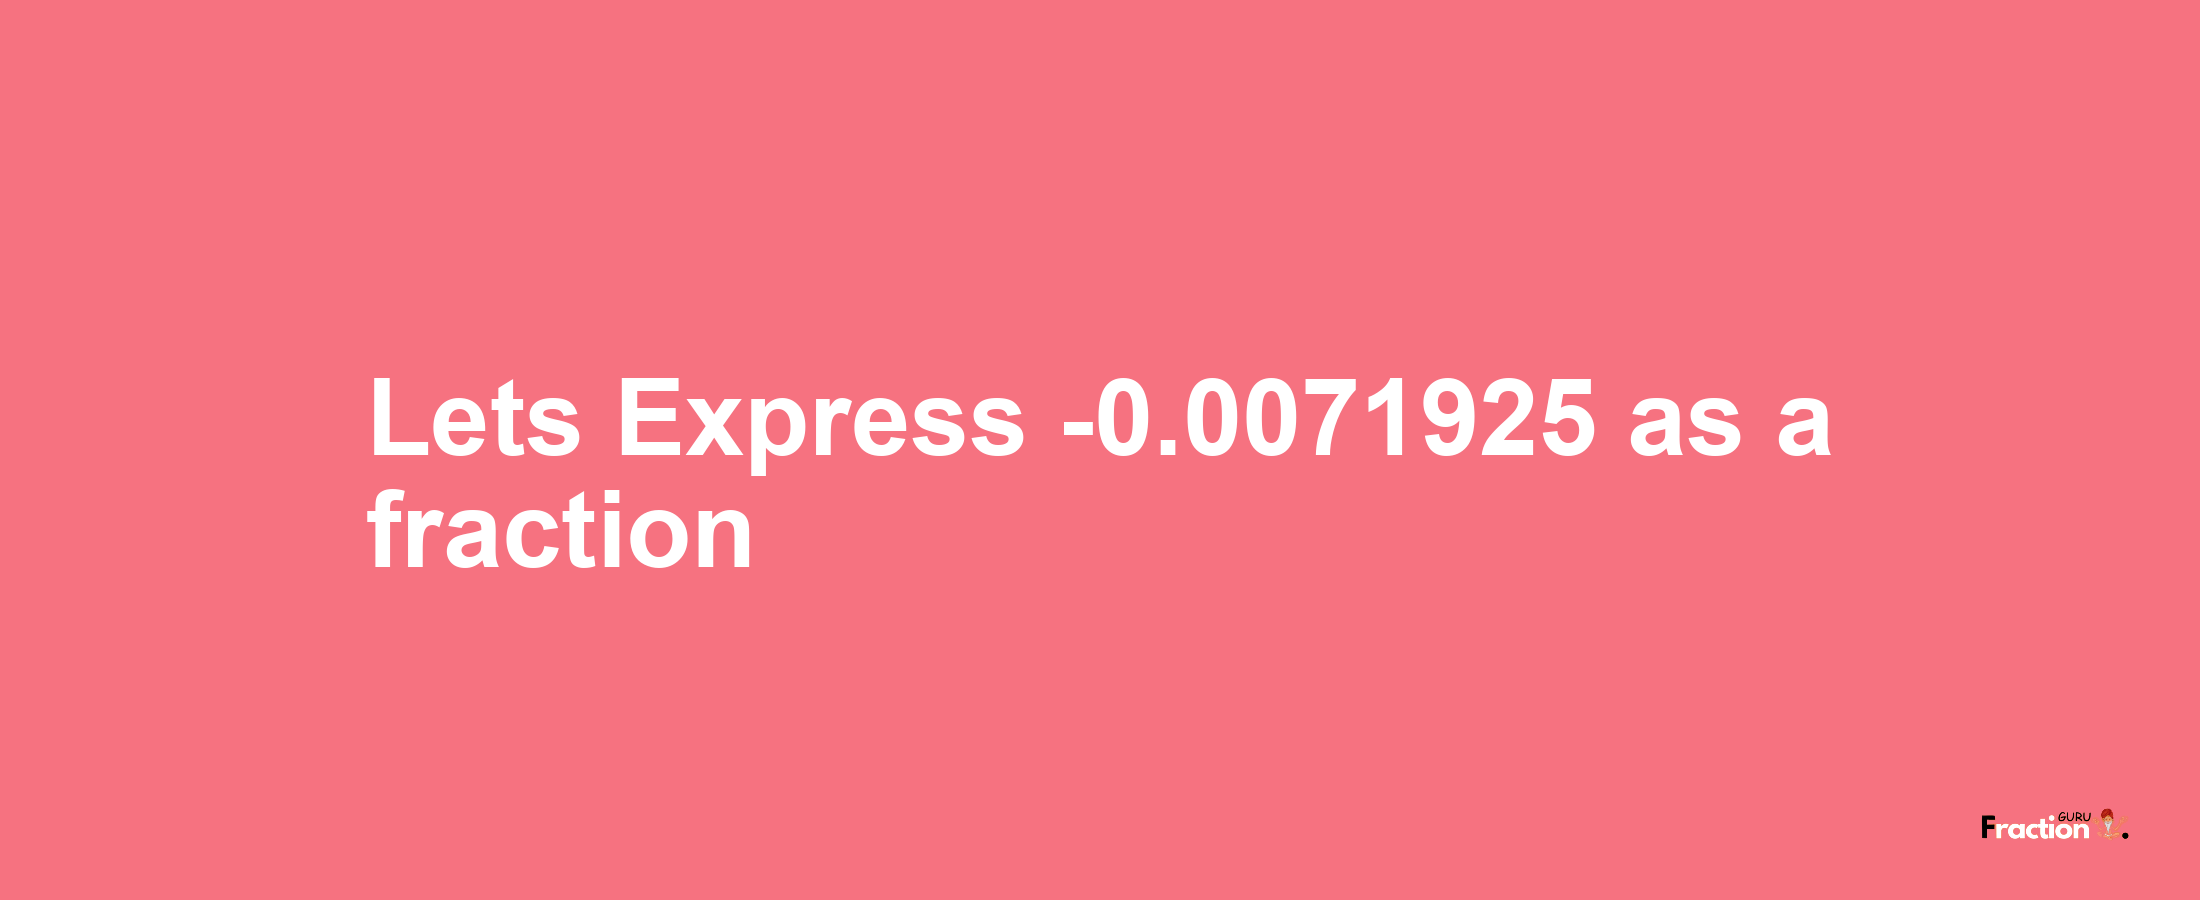 Lets Express -0.0071925 as afraction